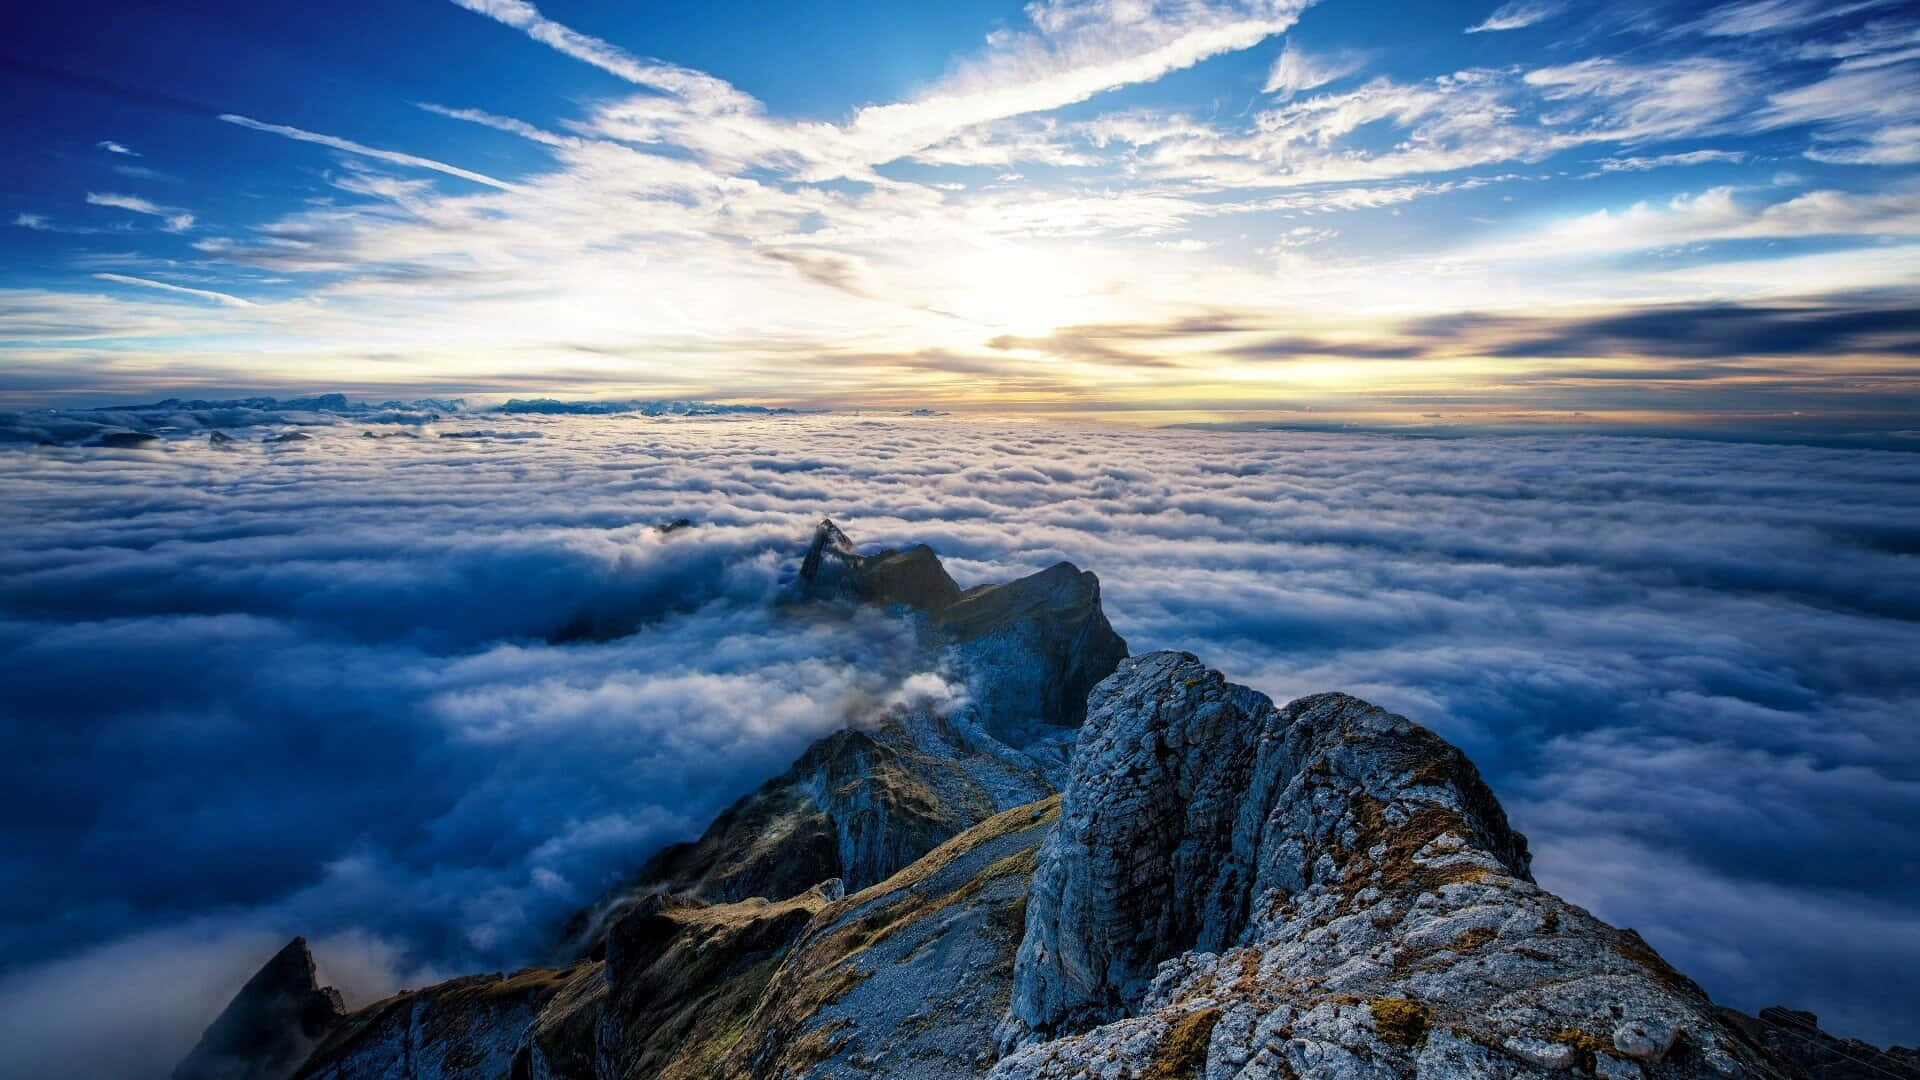 Blue Mountain Above The Clouds Wallpaper